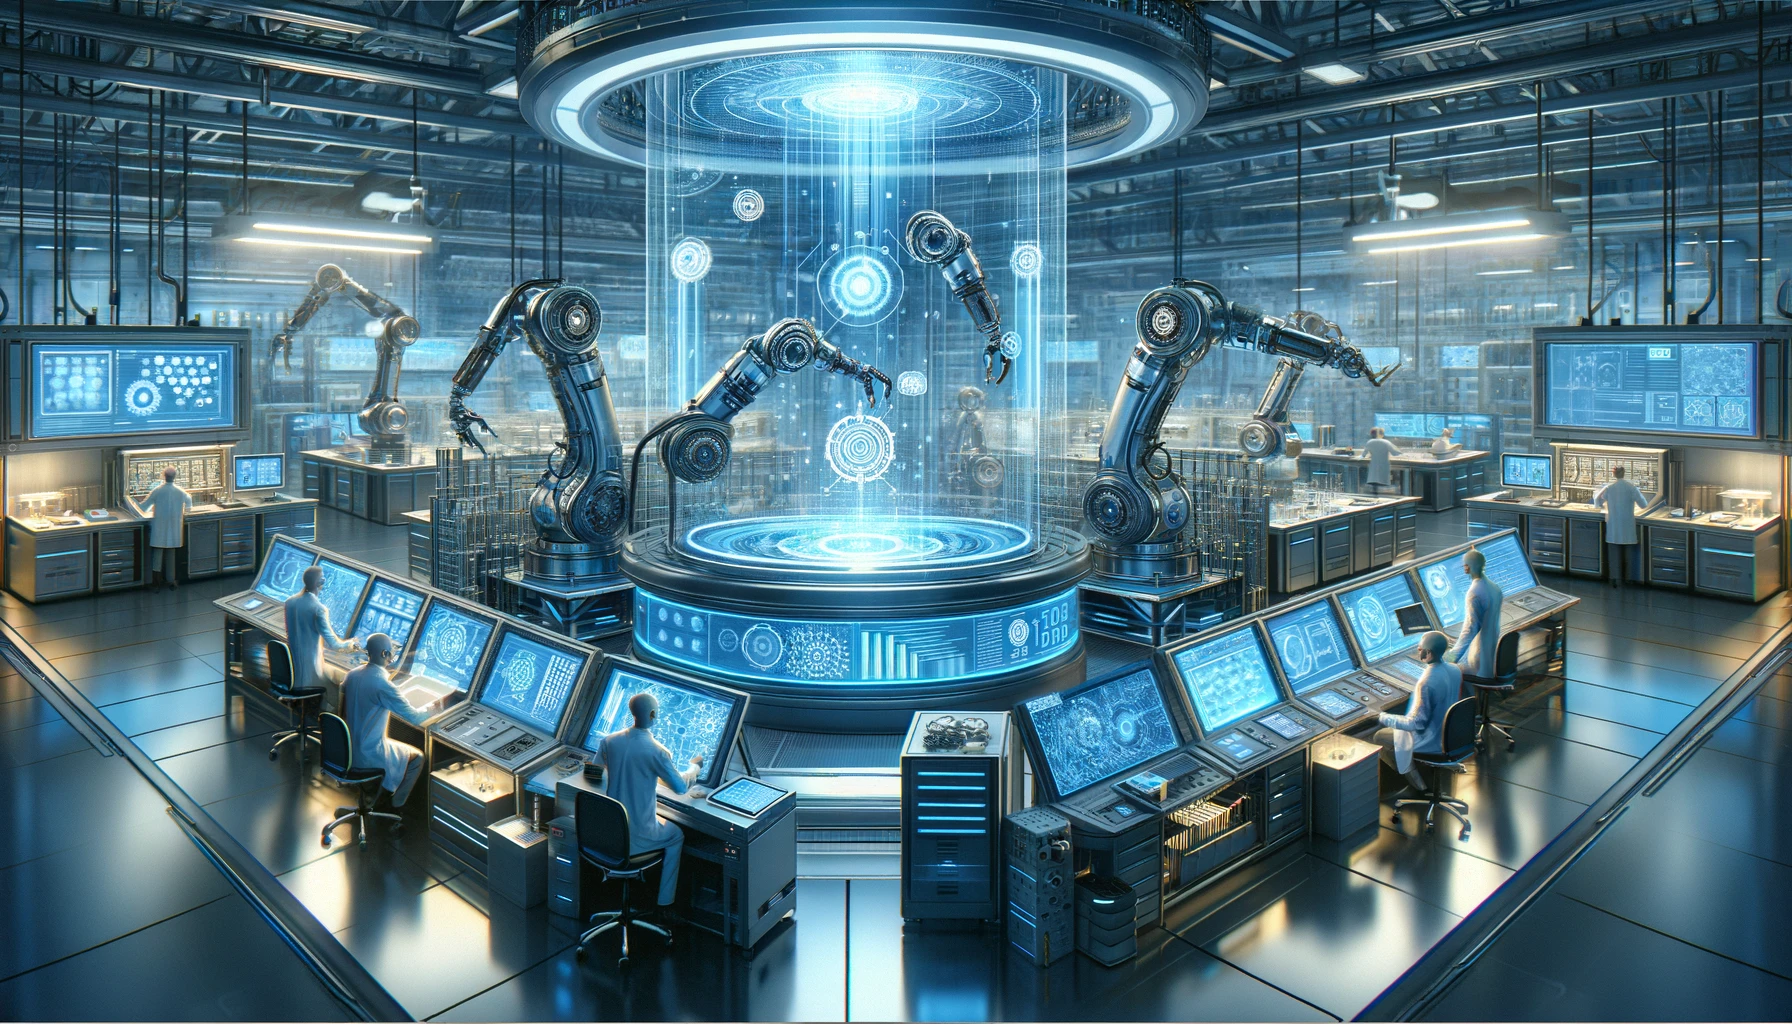 The scene depicts a high-tech laboratory environment where engineers and scientists are using advanced AI to analyze and manipulate metal alloys, showcasing the integration of futuristic technology in the field of metallurgy.